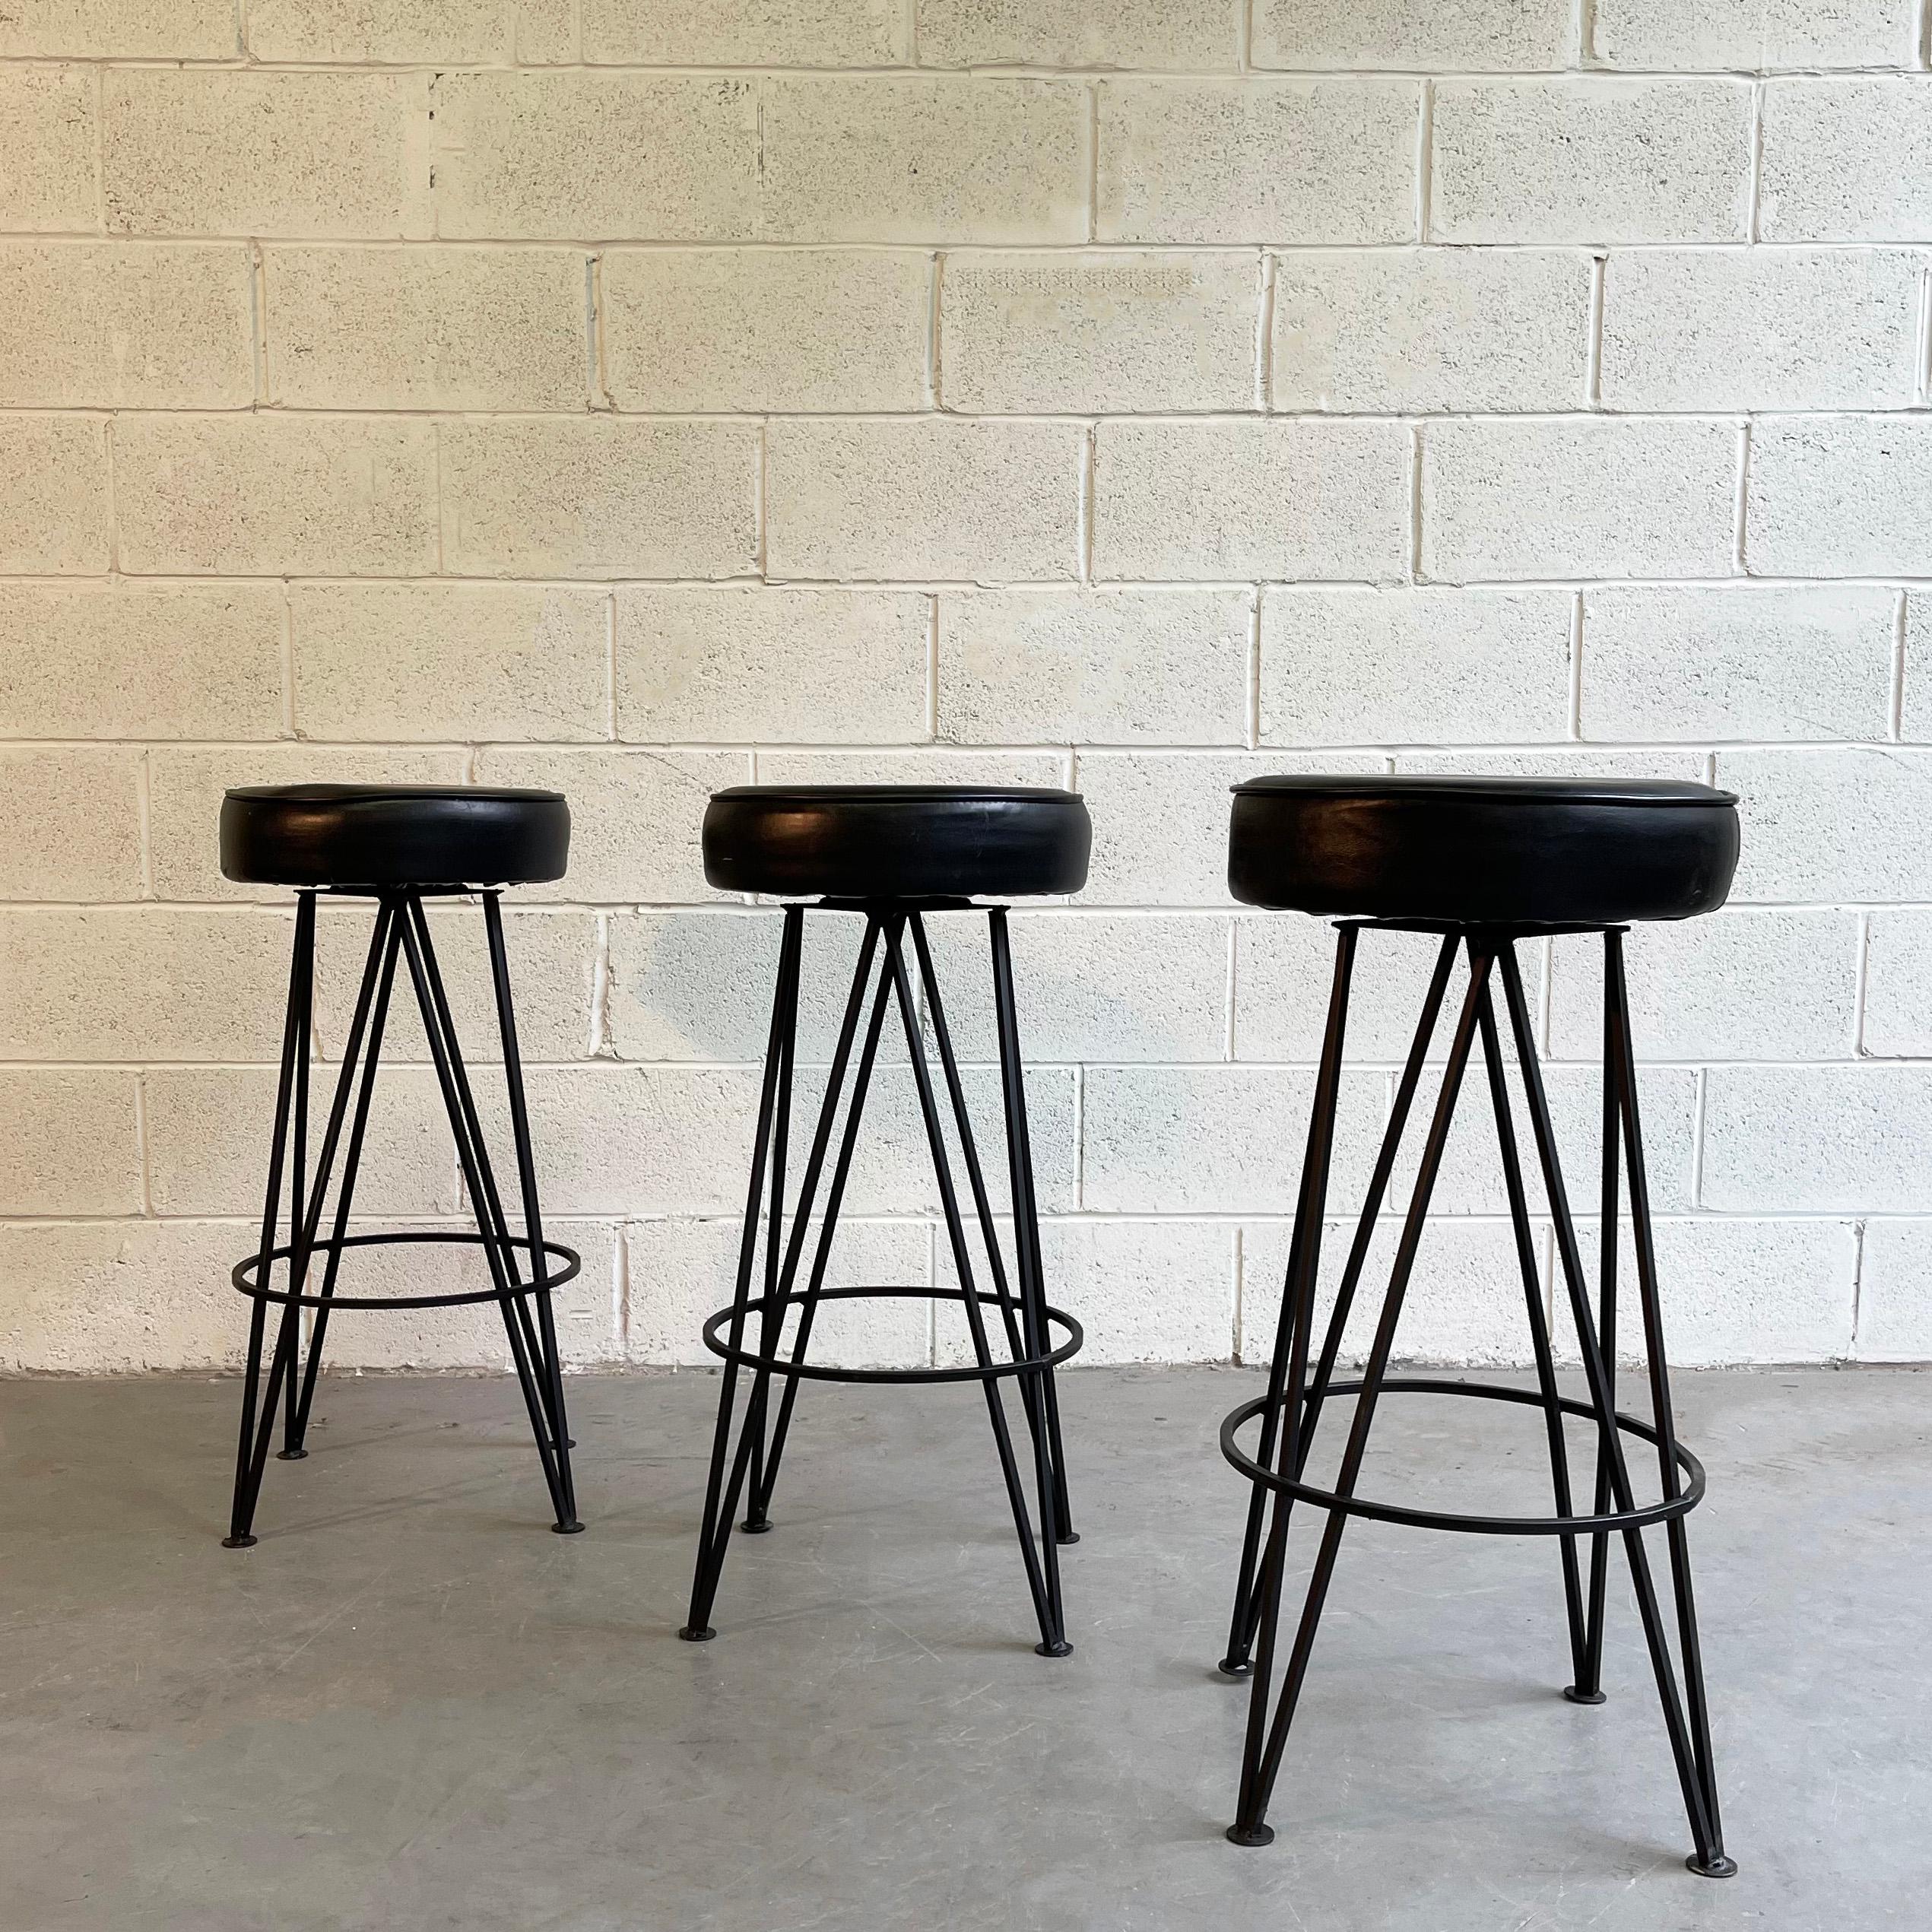 American Mid-Century Modern Wrought Iron Upholstered Bar Stools